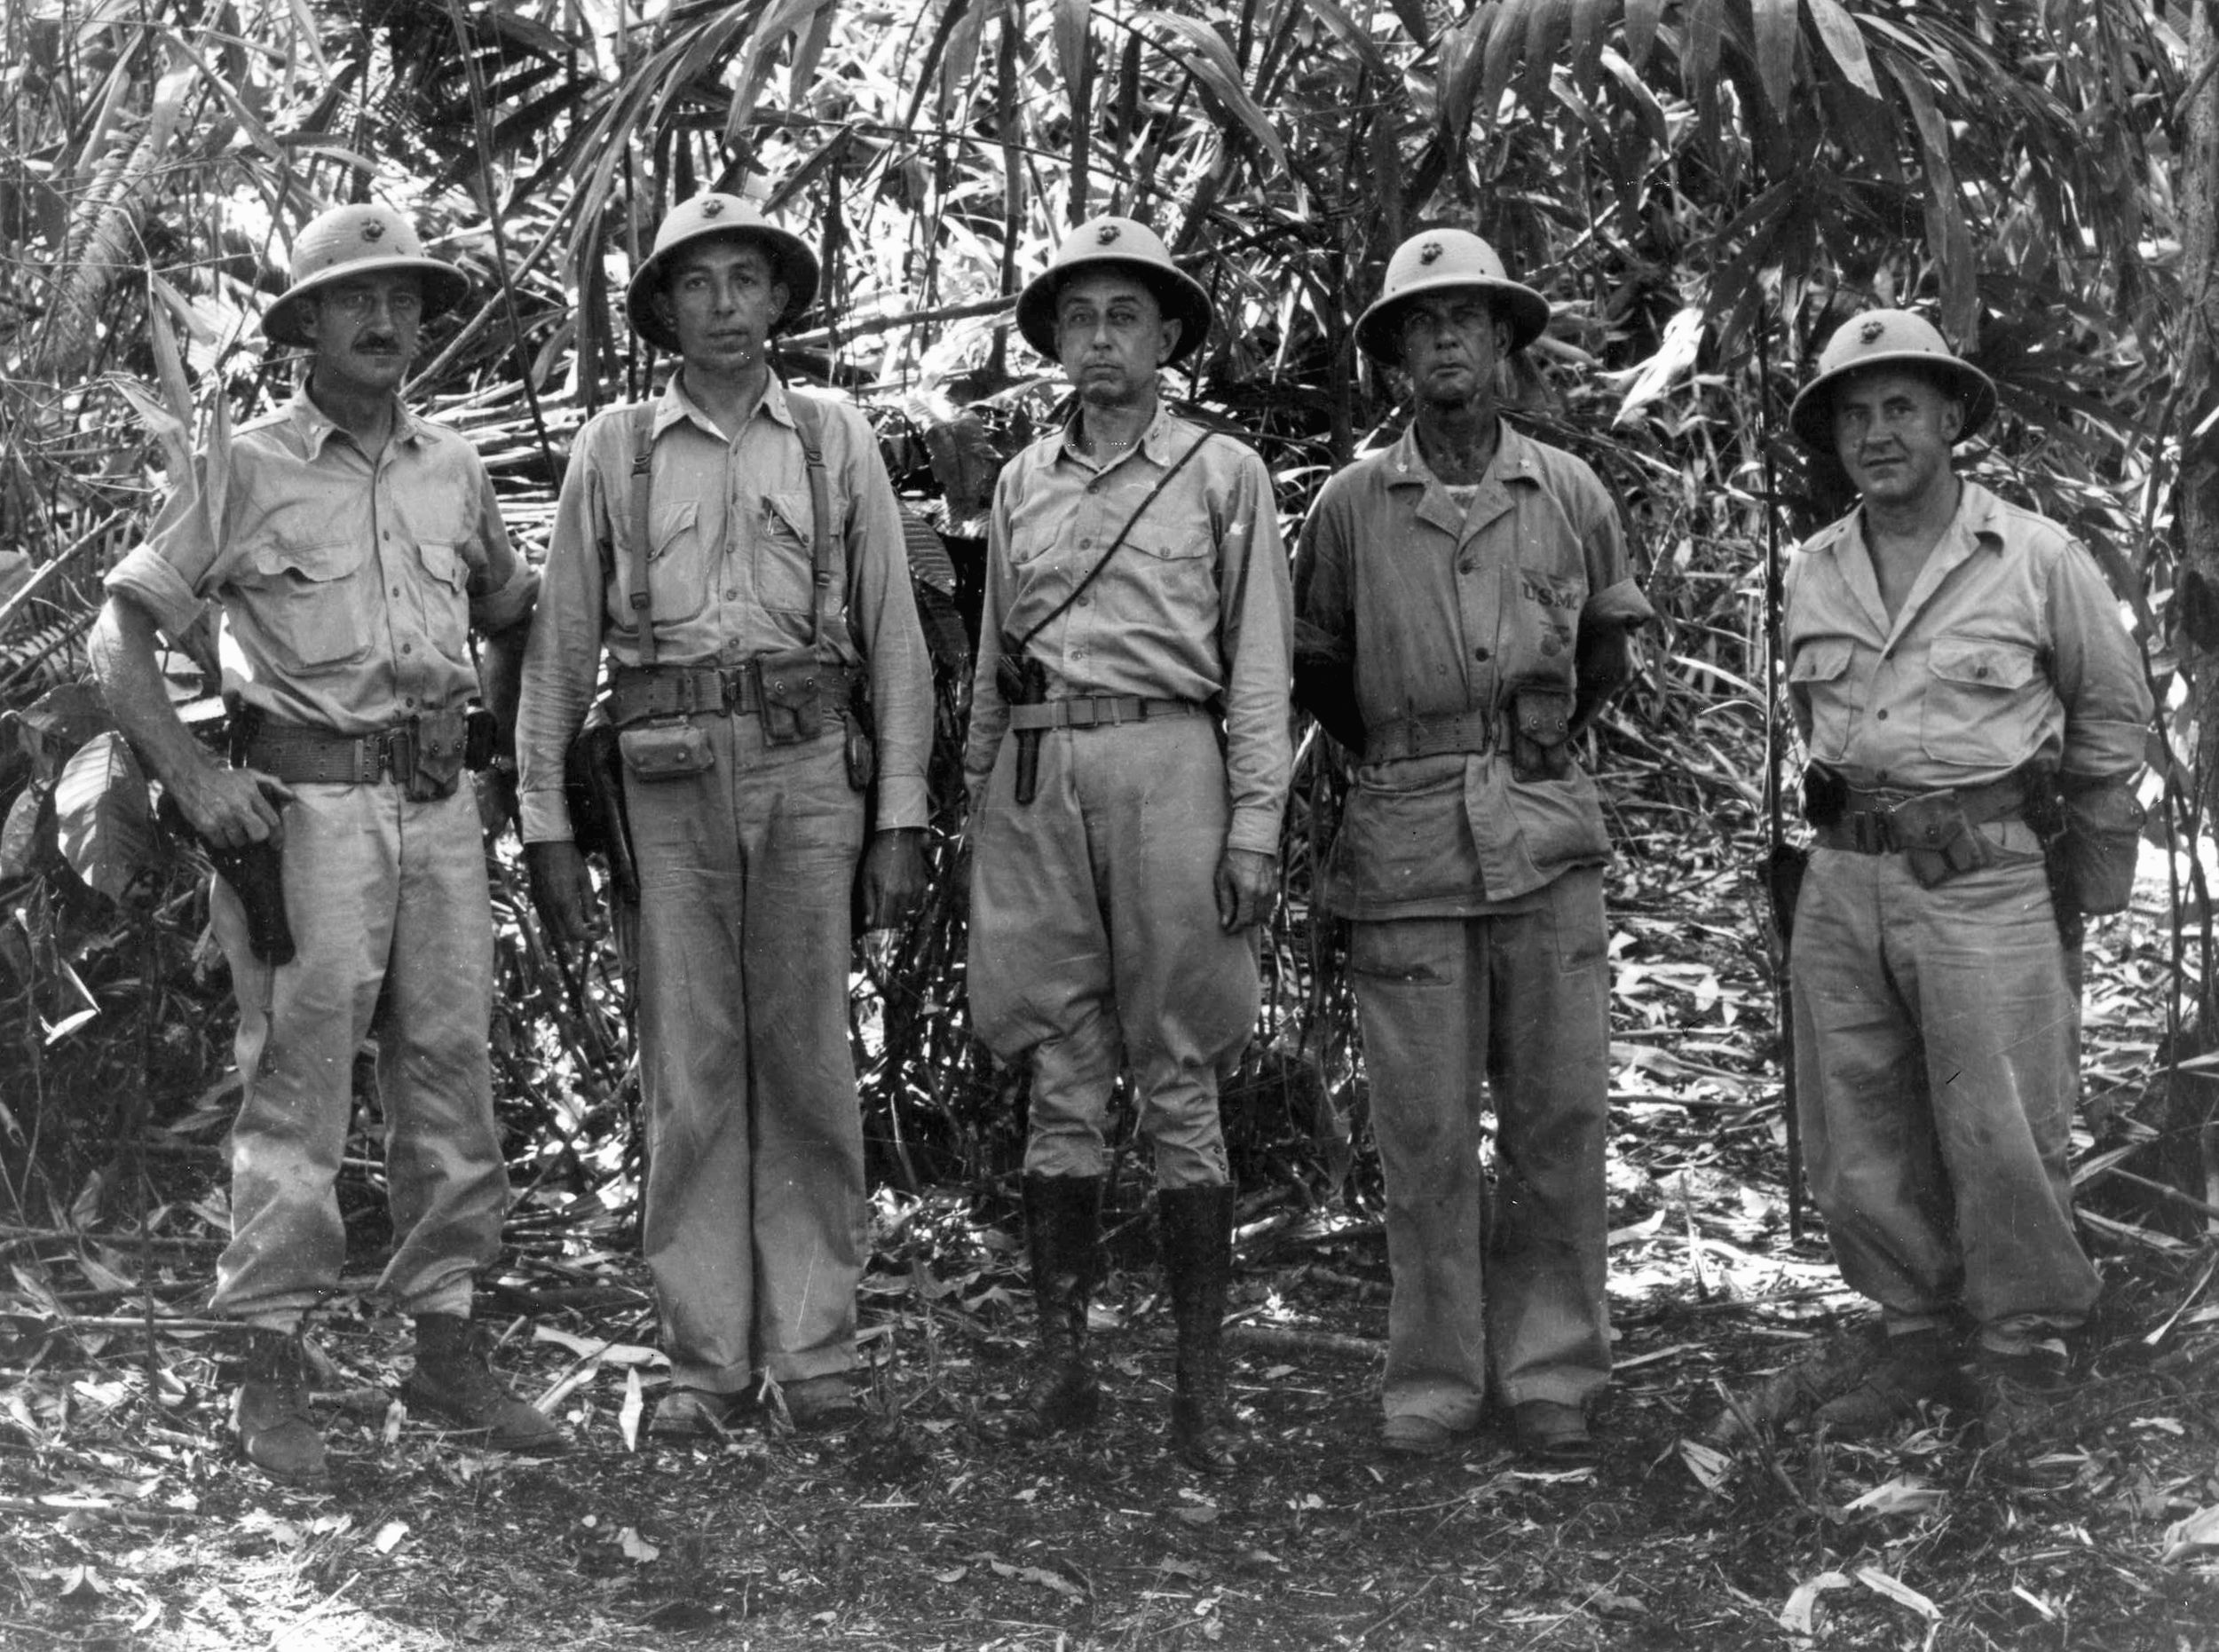 Senior officers of the 1st Marine Division, which fought heroically at Guadalcanal, included (left to right), Lieutenant Colonel L.B. Cresswell, Lieutenant Colonel Pollock, Colonel Clifton B. Cates, Lieutenant Colonel William N. McKelvy, and Lieutenant Colonel William W. Stickney.